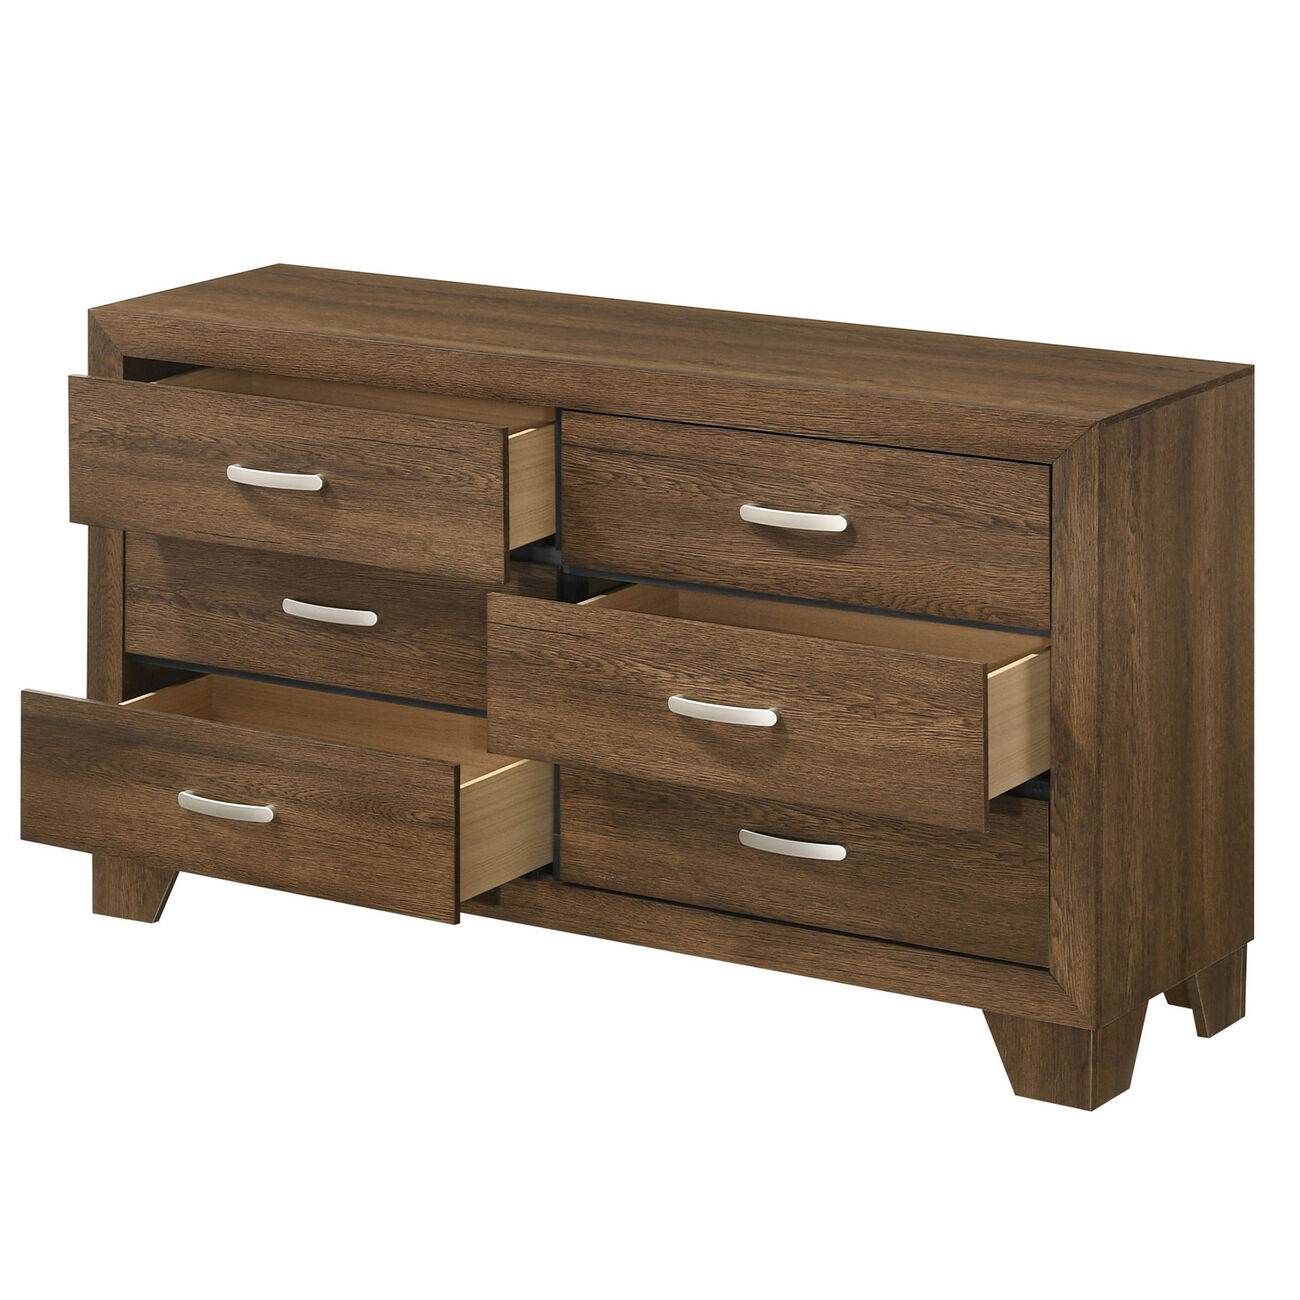 Transitional Style Wooden Dresser with 2 Drawers and Metal Handles, Brown